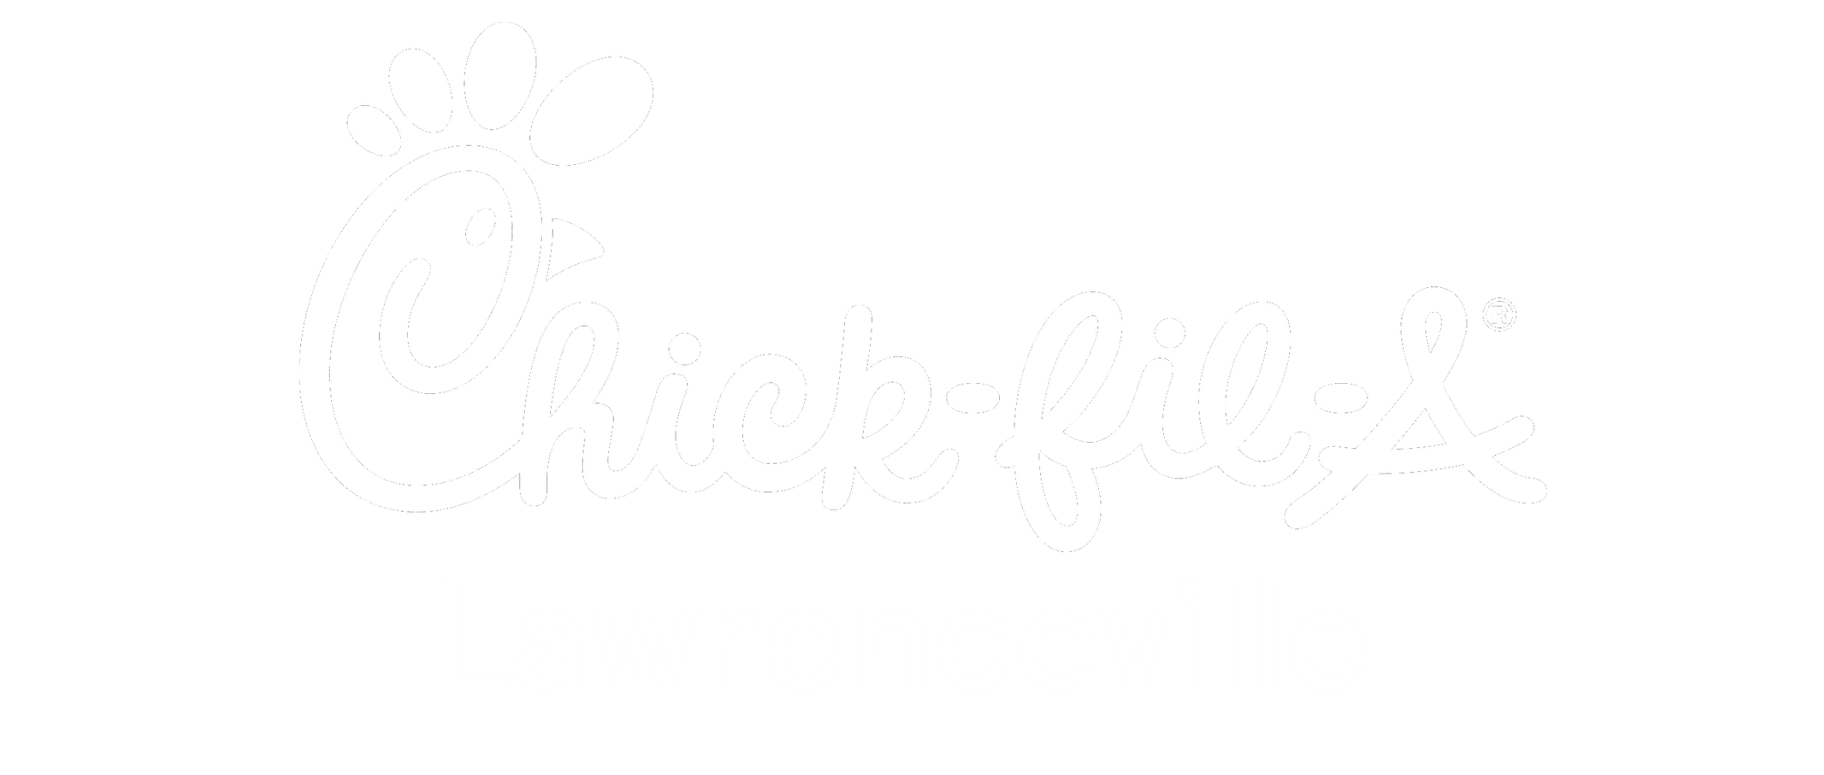 Chick-fil-A Lawrenceveille